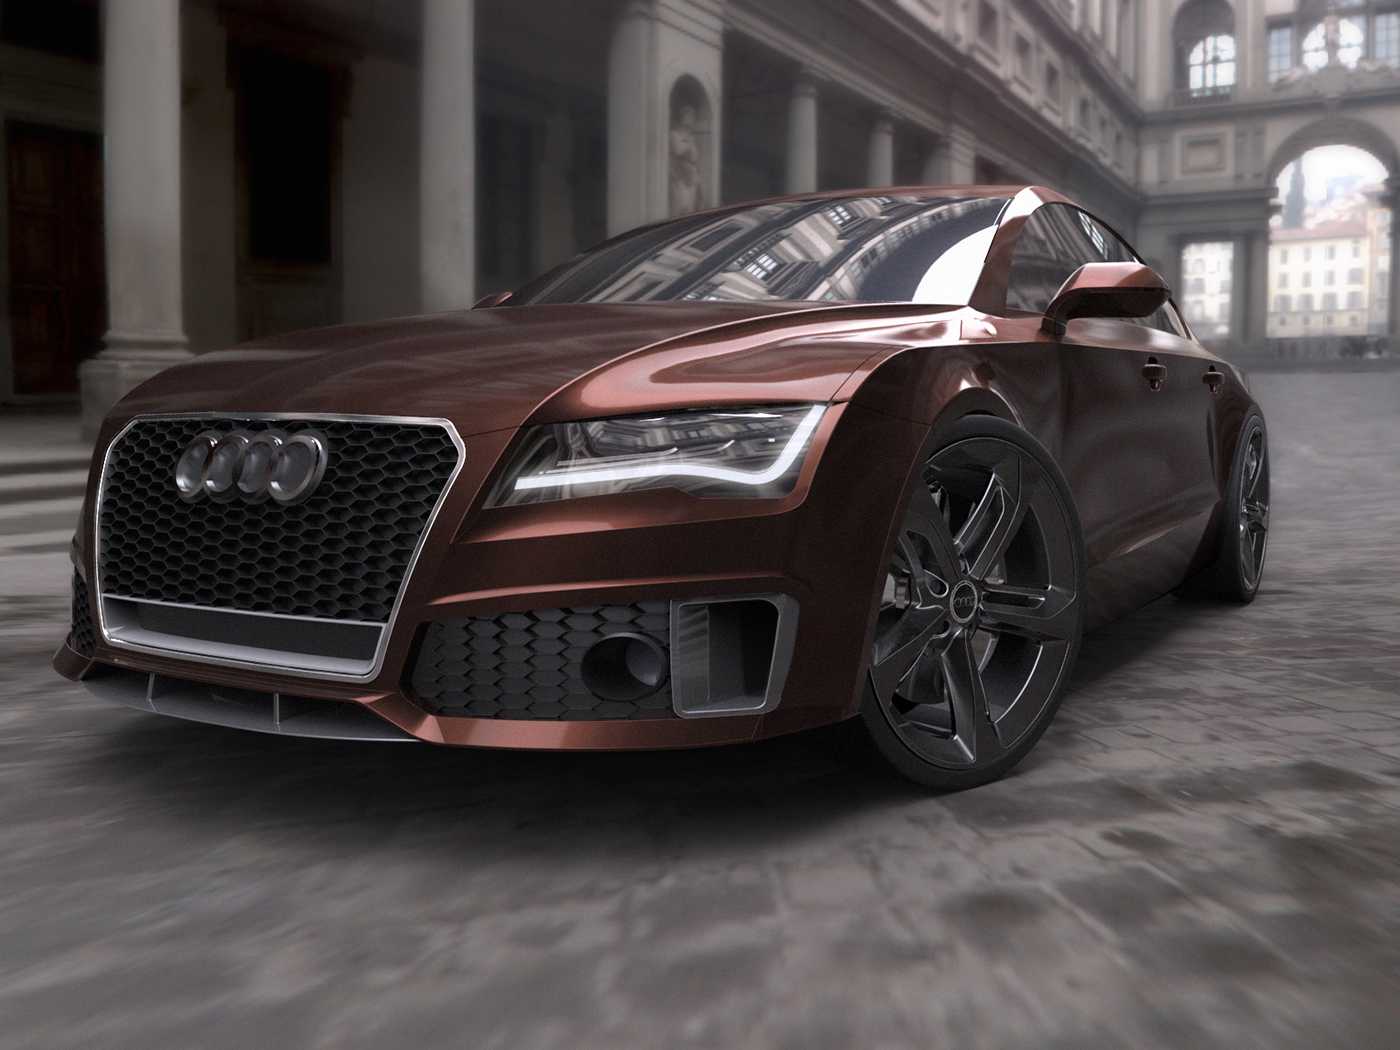 Audi Audi RS7 RS7 Solidworks Surface Modeling solid Audi 3D 3d modeling car modeling